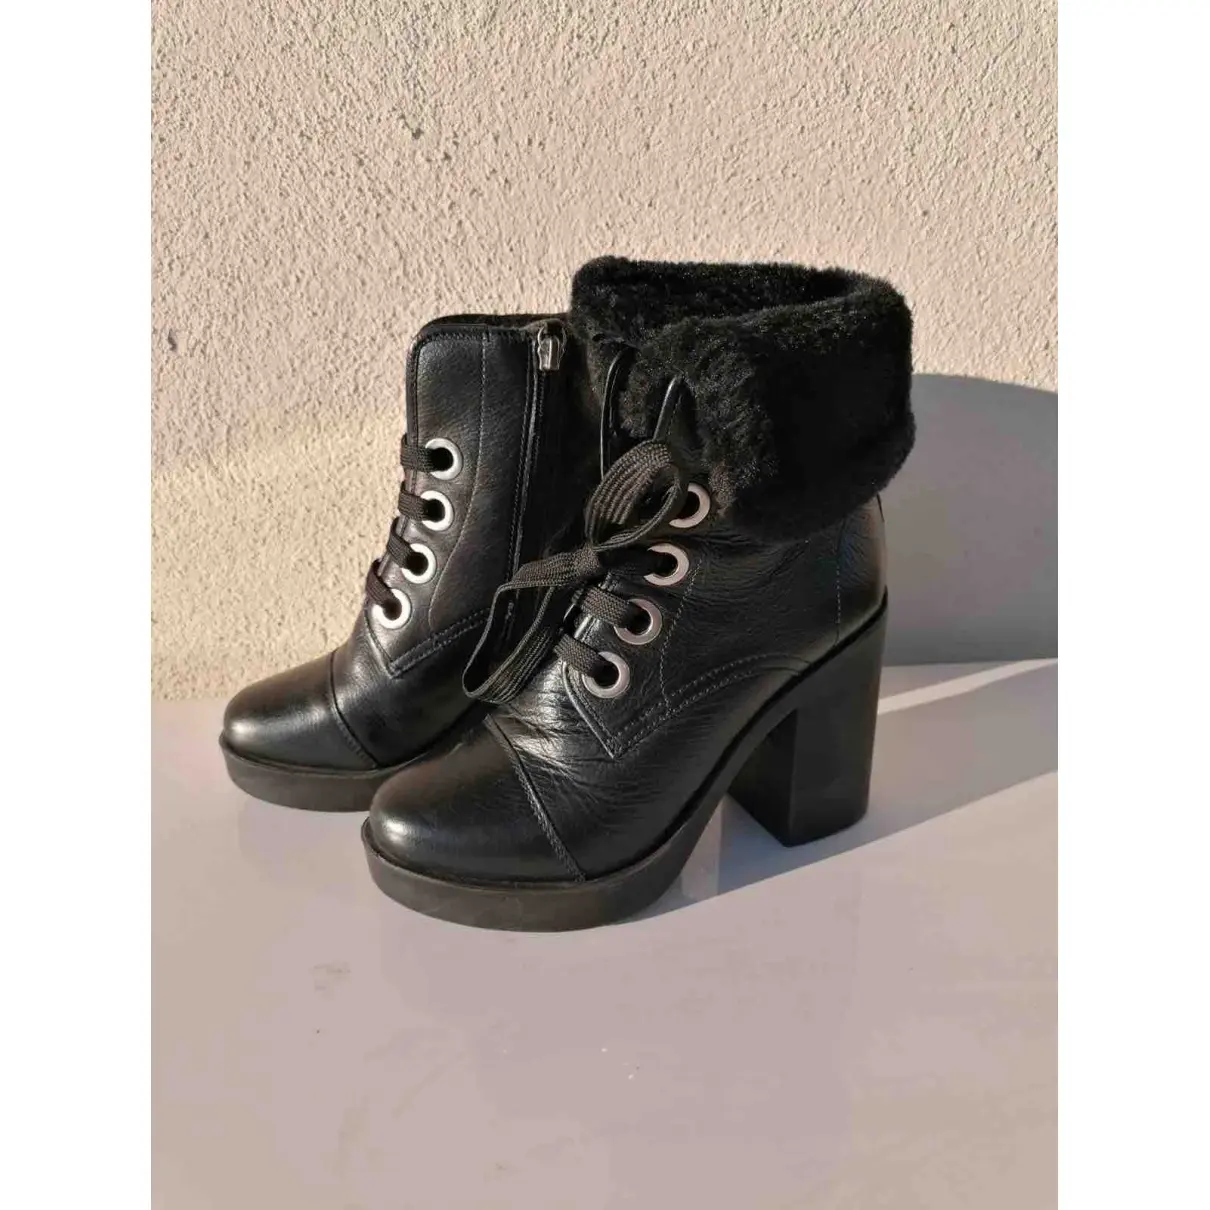 Gioseppo Leather ankle boots for sale